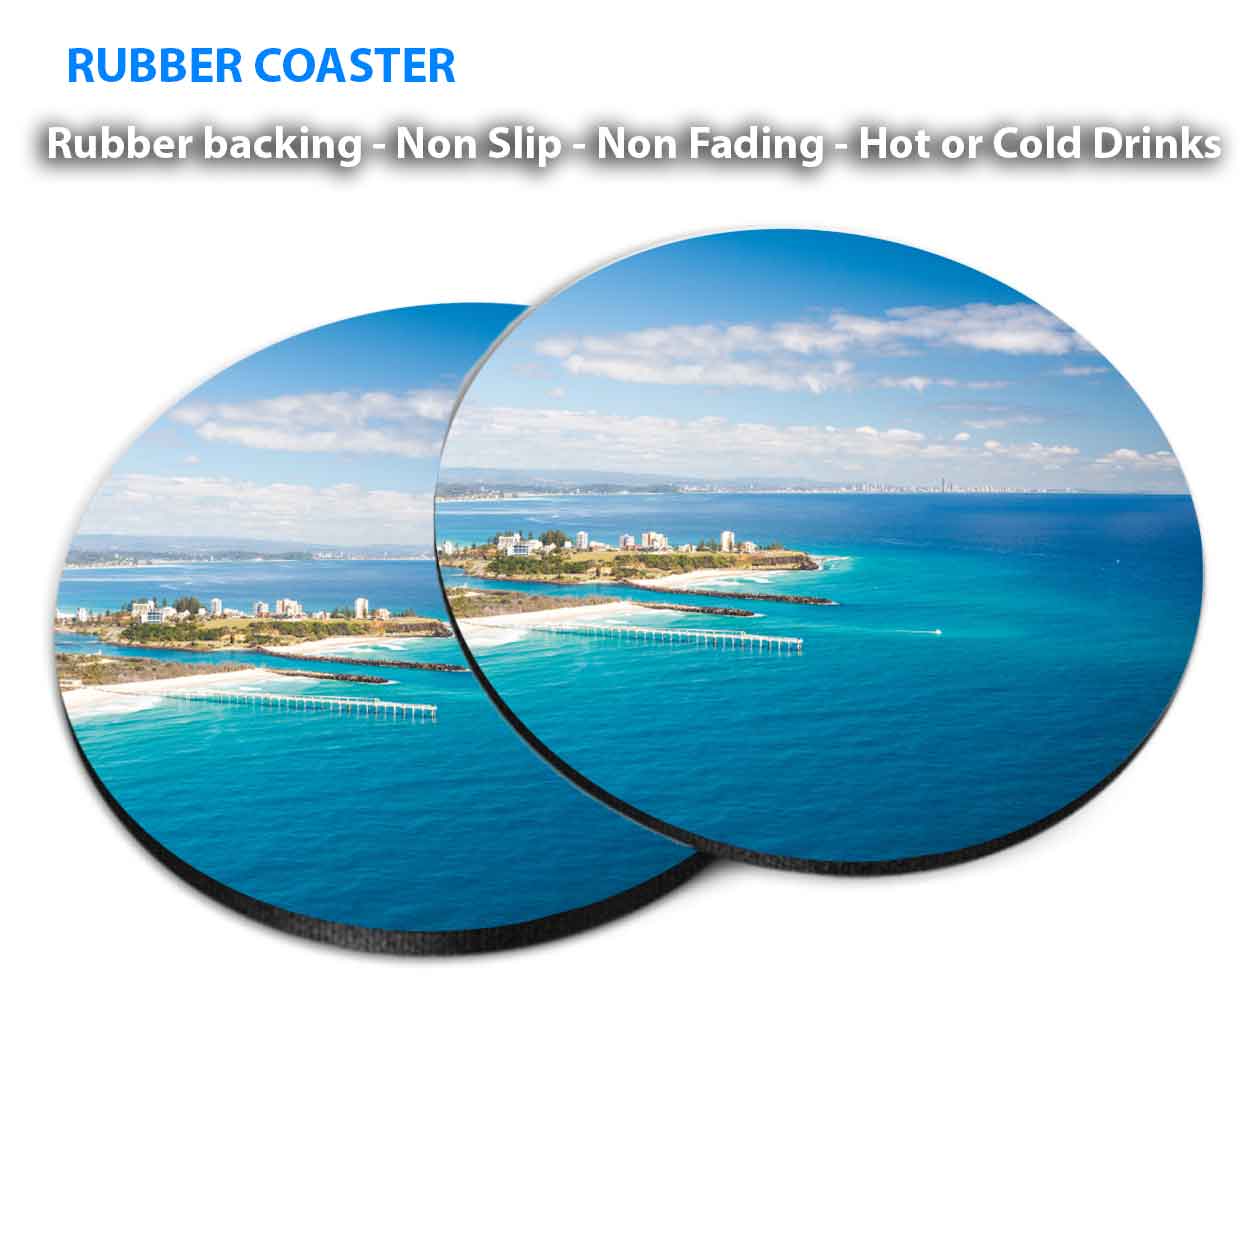 Snapper Rocks & The Tweed River Coasters Wood & Rubber - Set of 6 Coasters